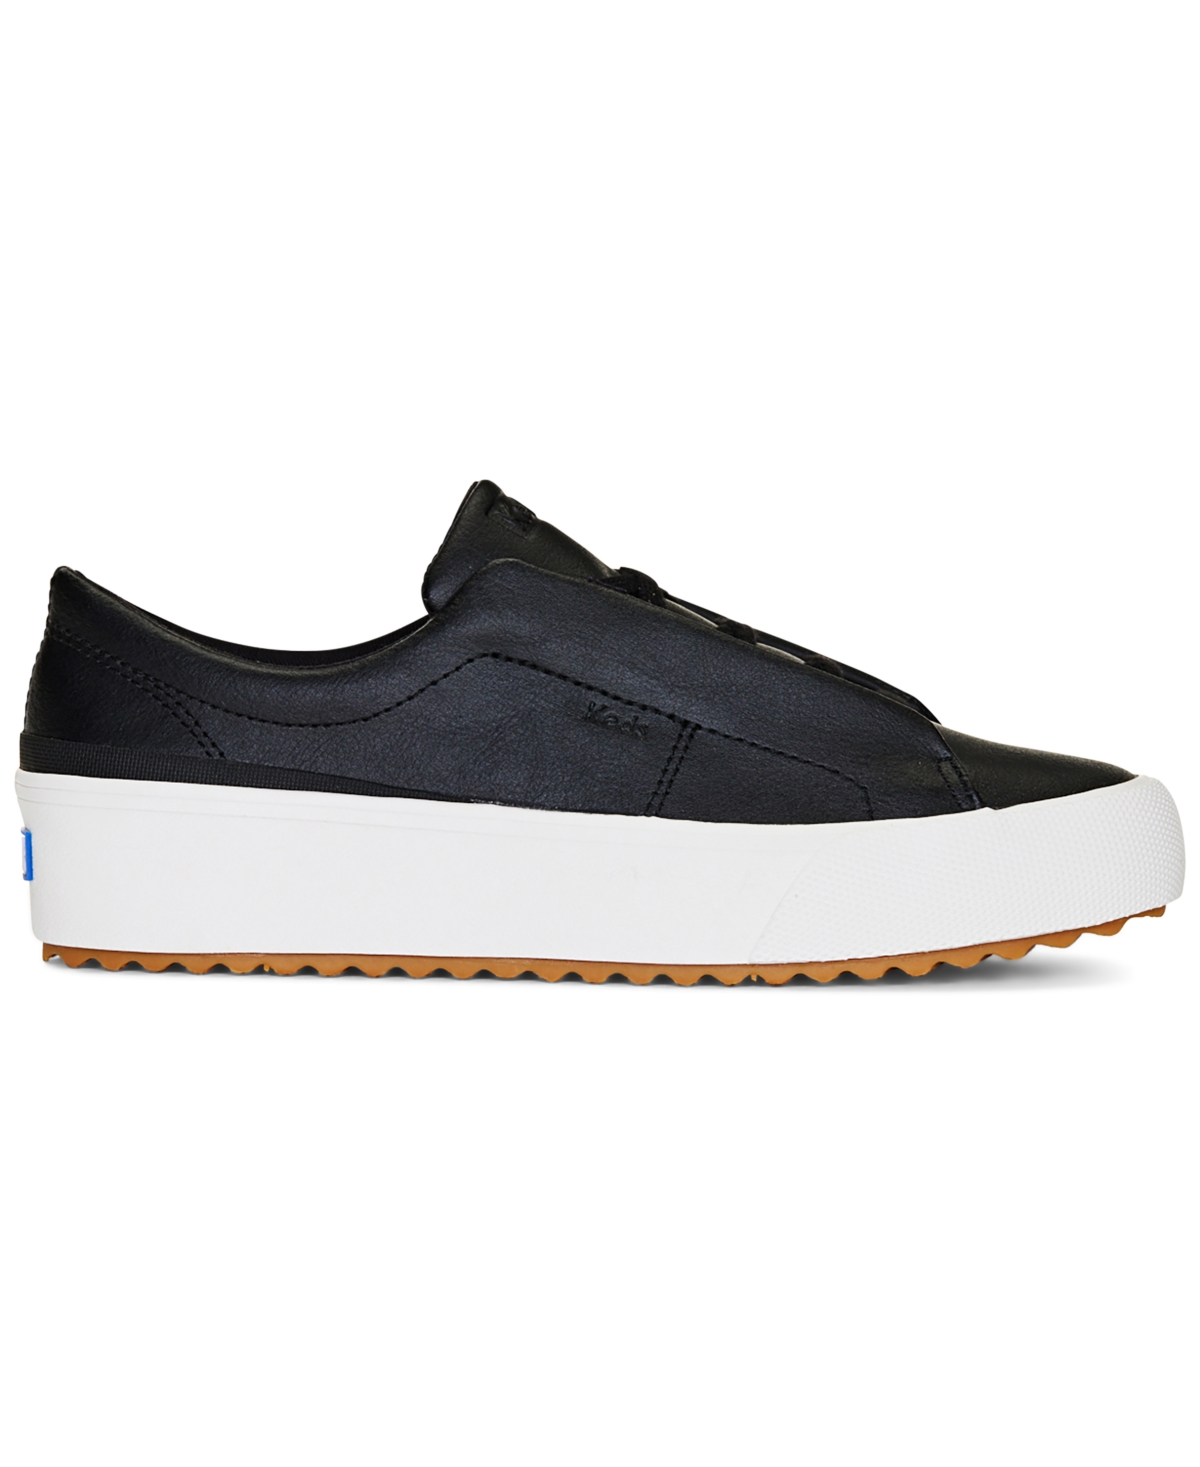 Shop Keds Women's Remi Leather Casual Sneakers From Finish Line In Black